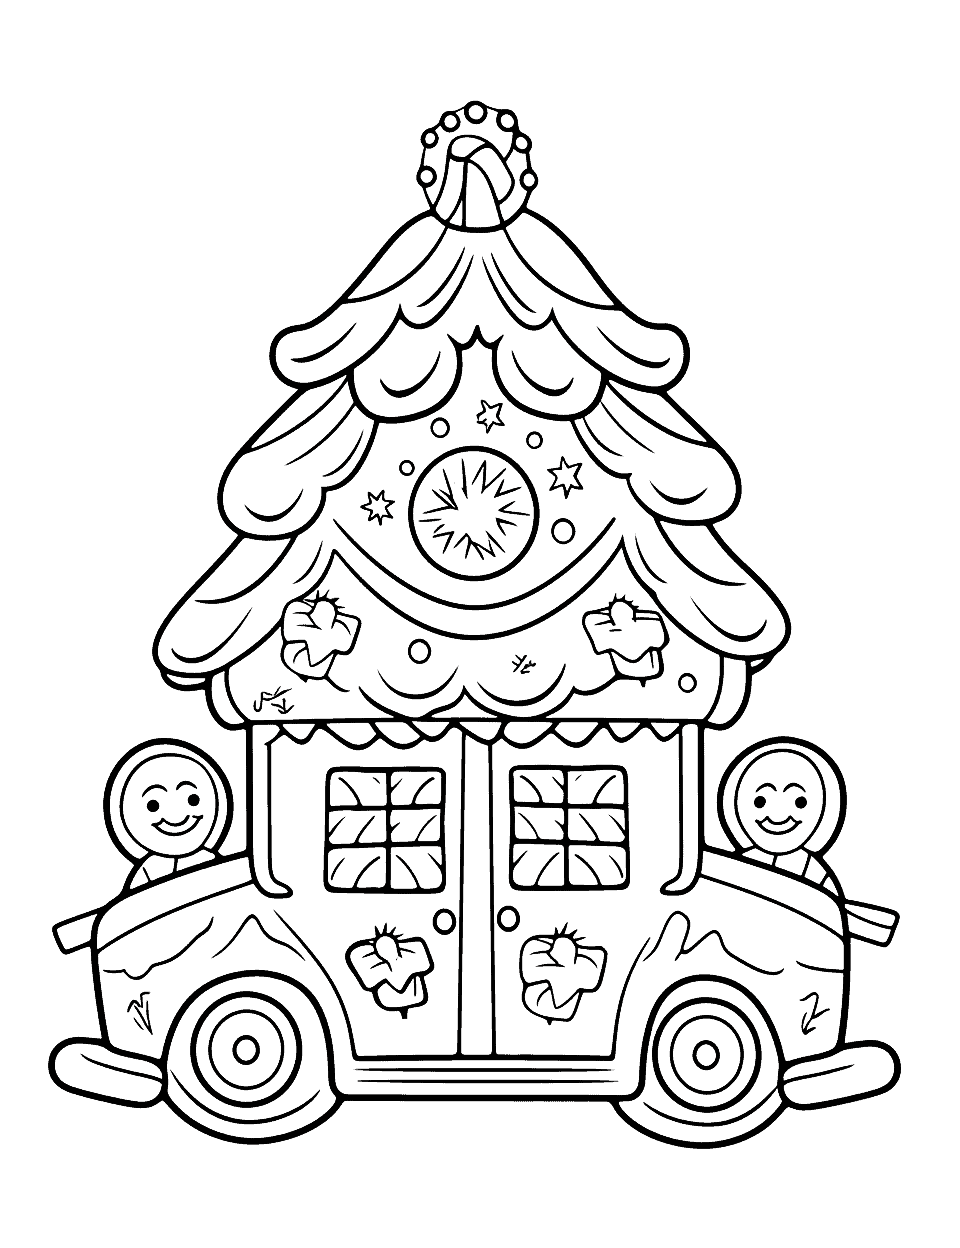 Gingerbread Family Car Christmas Coloring Page - A gingerbread family driving in a gingerbread car, heading to a holiday party.